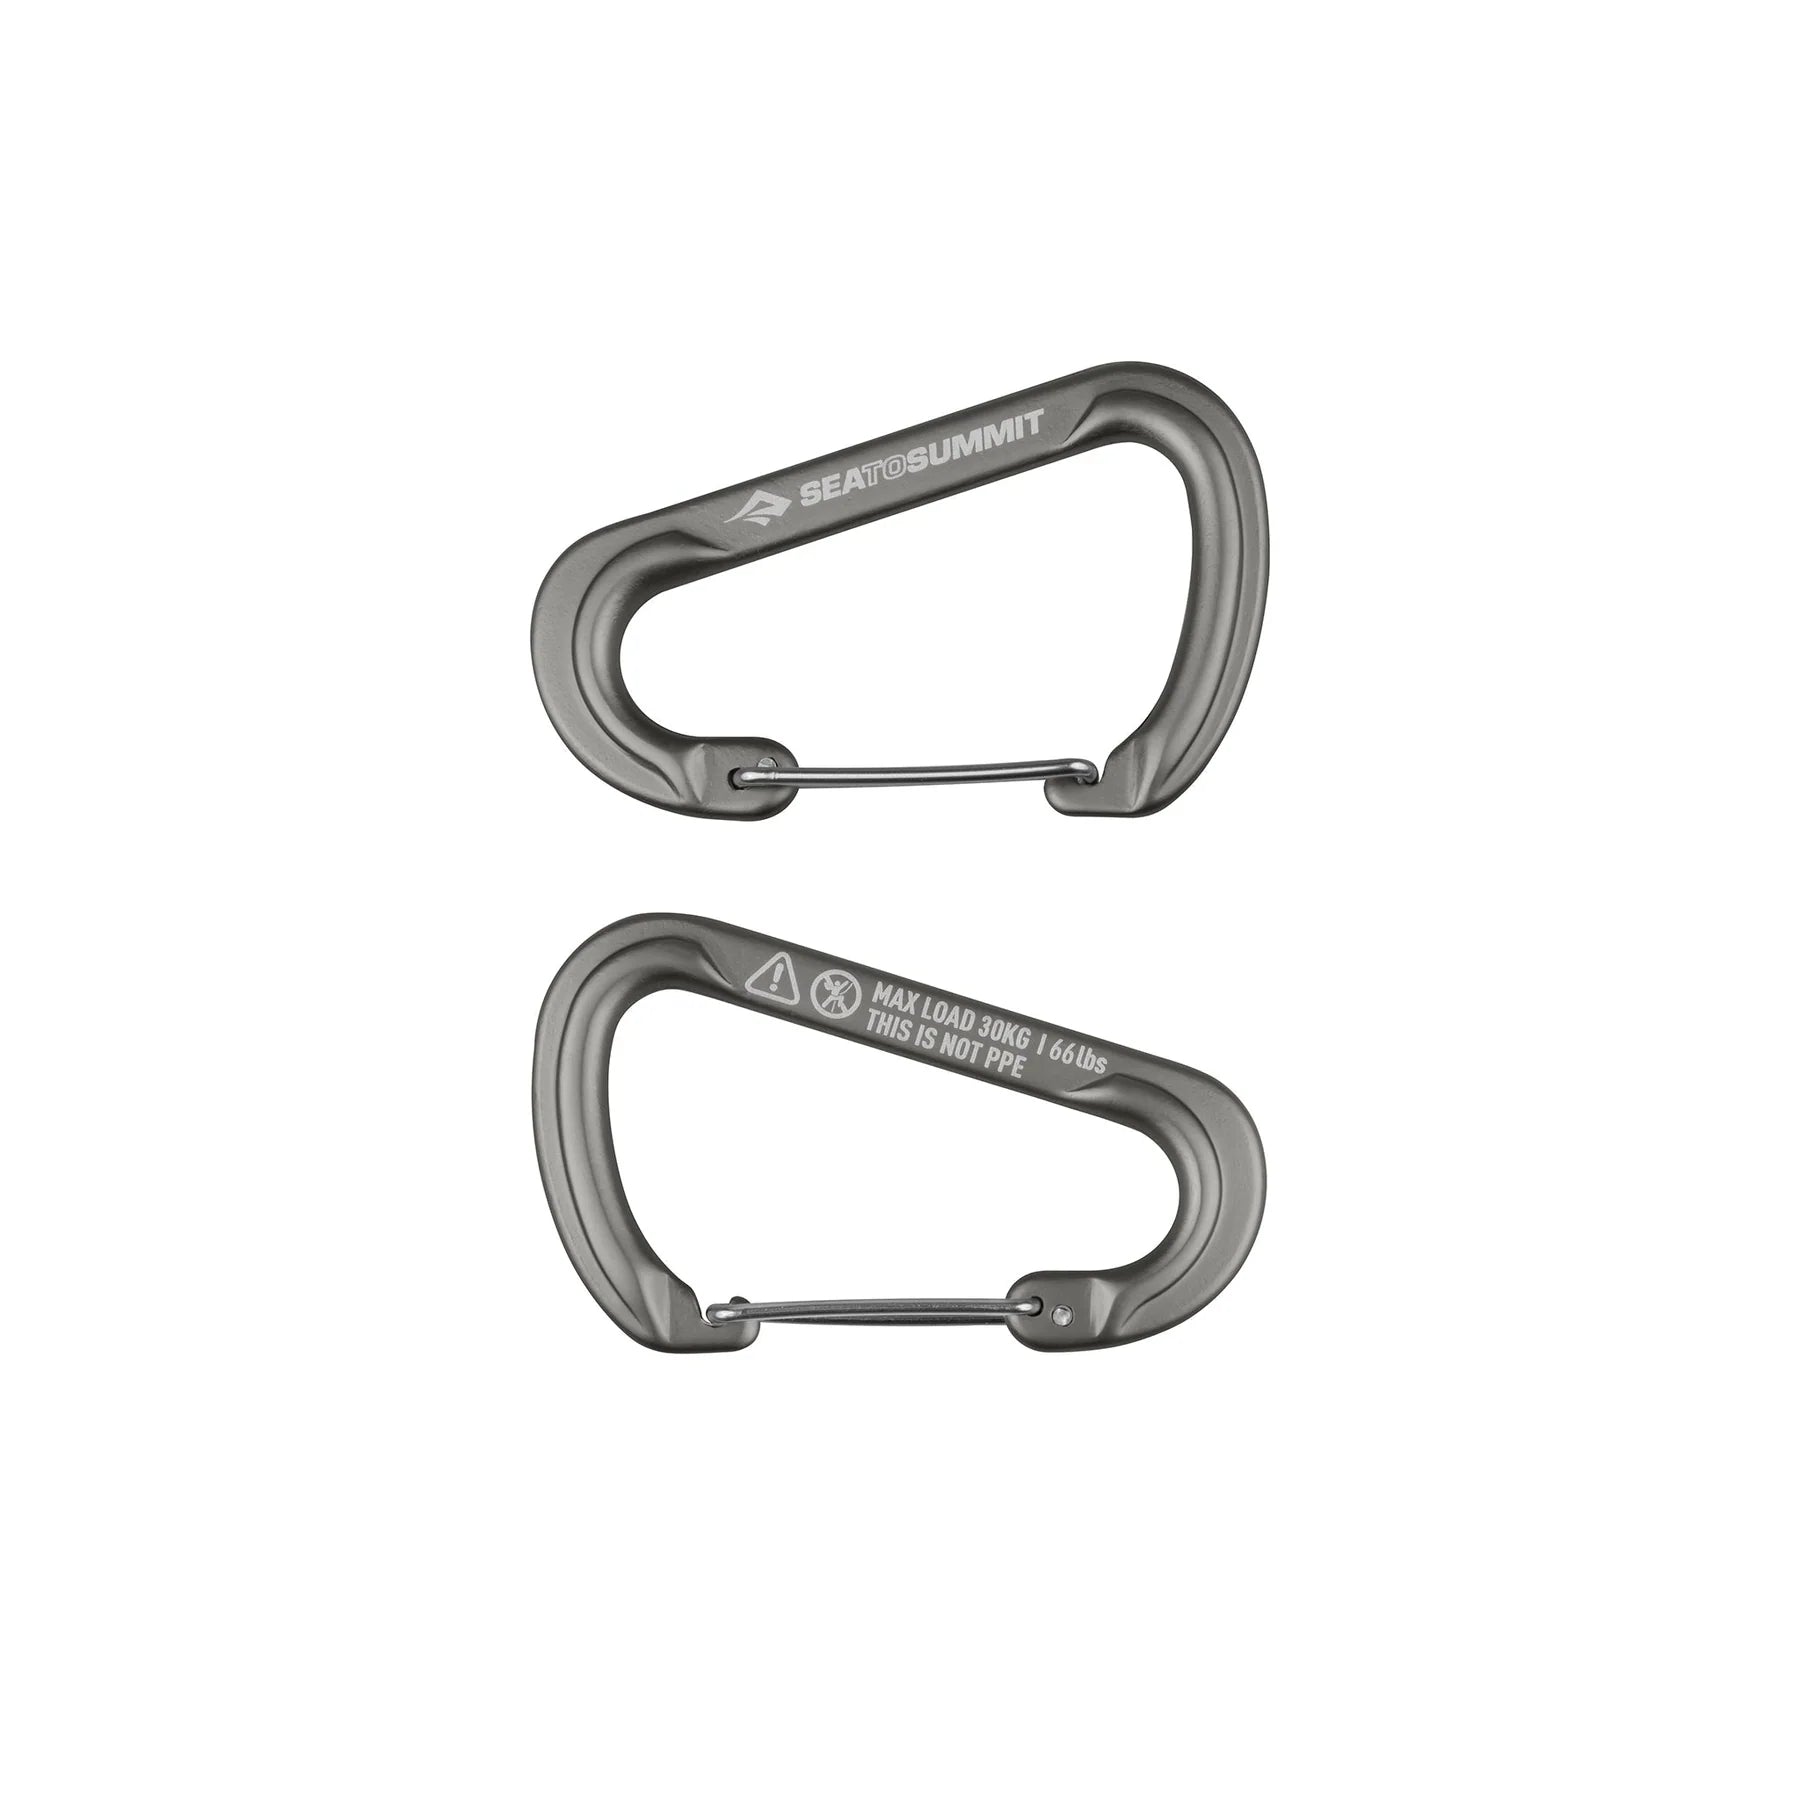 Sea to Summit Large Accessory Carabiner (2pk)